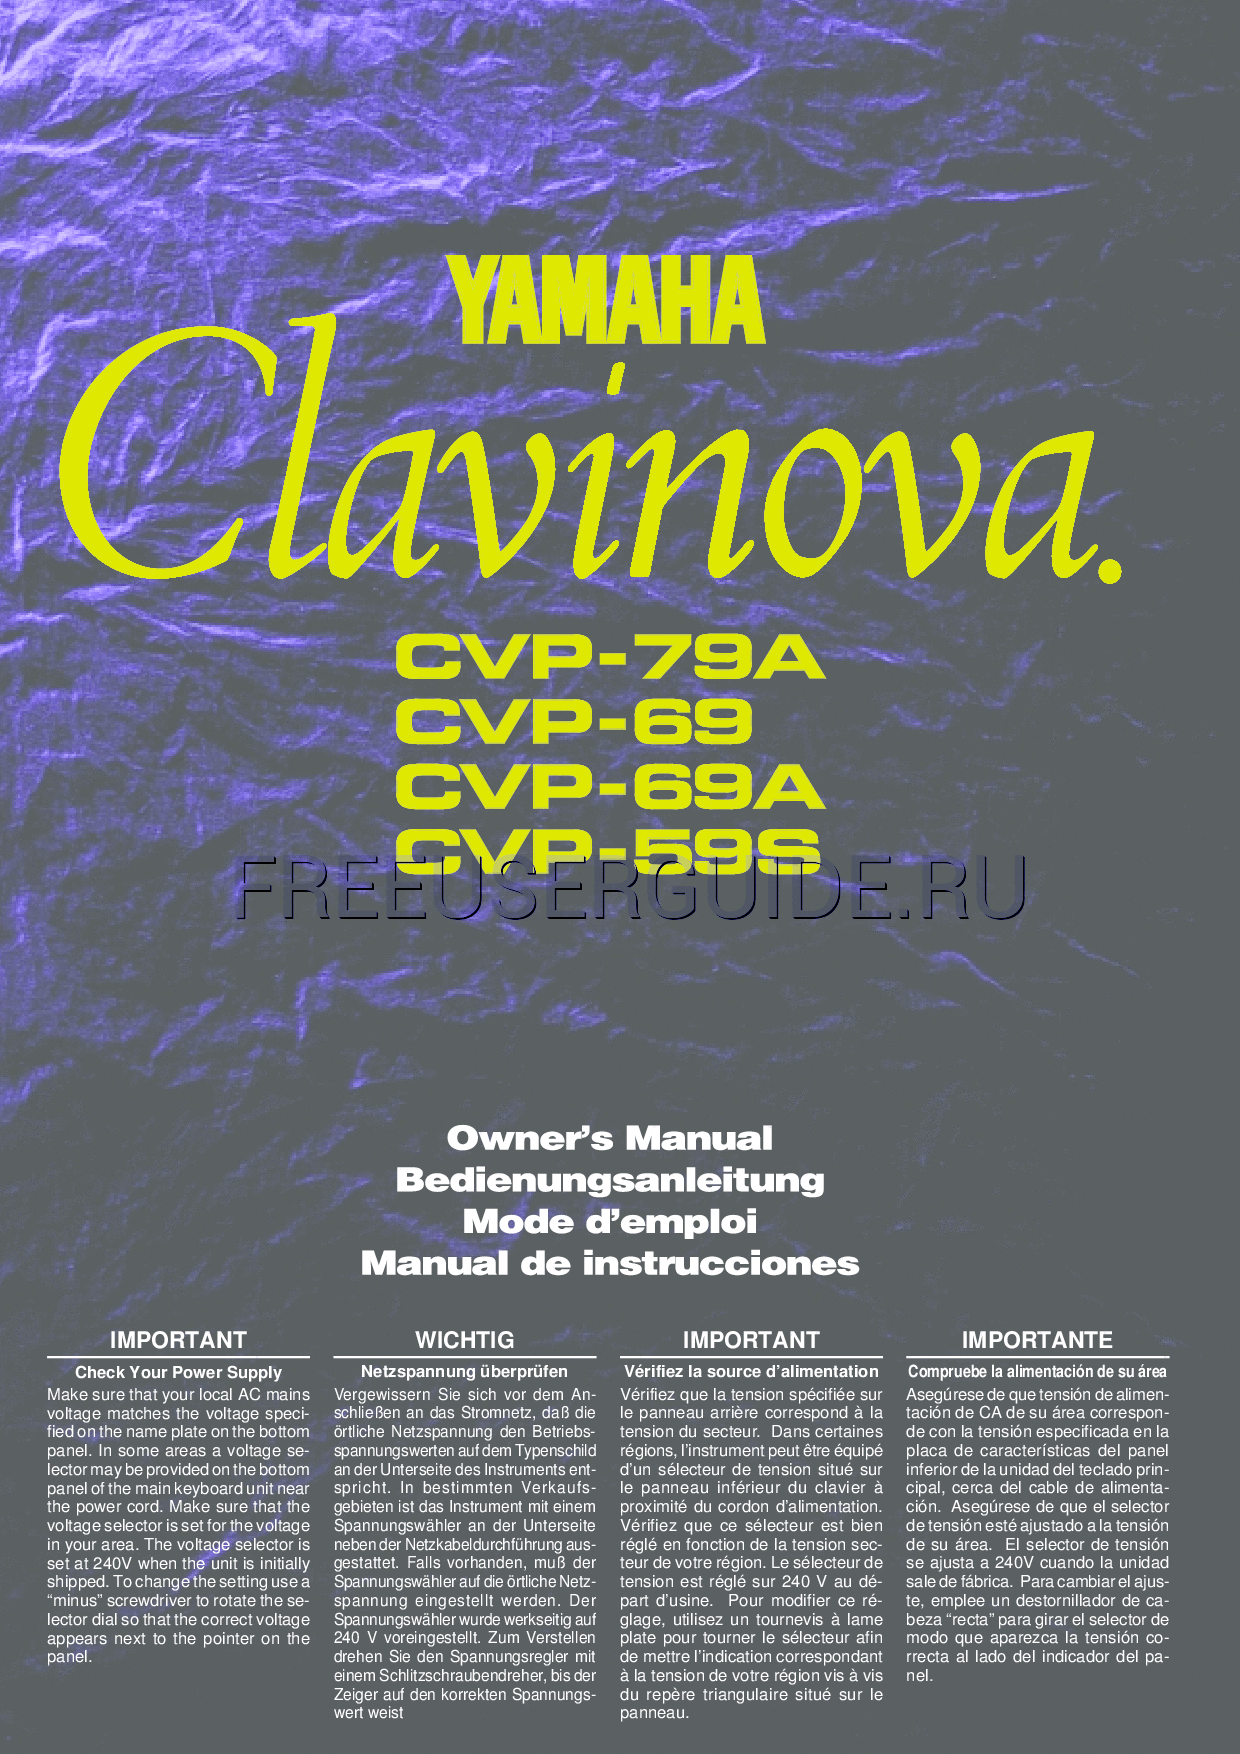 Read online Owner's Manual for Yamaha CVP-59S (Page 1)